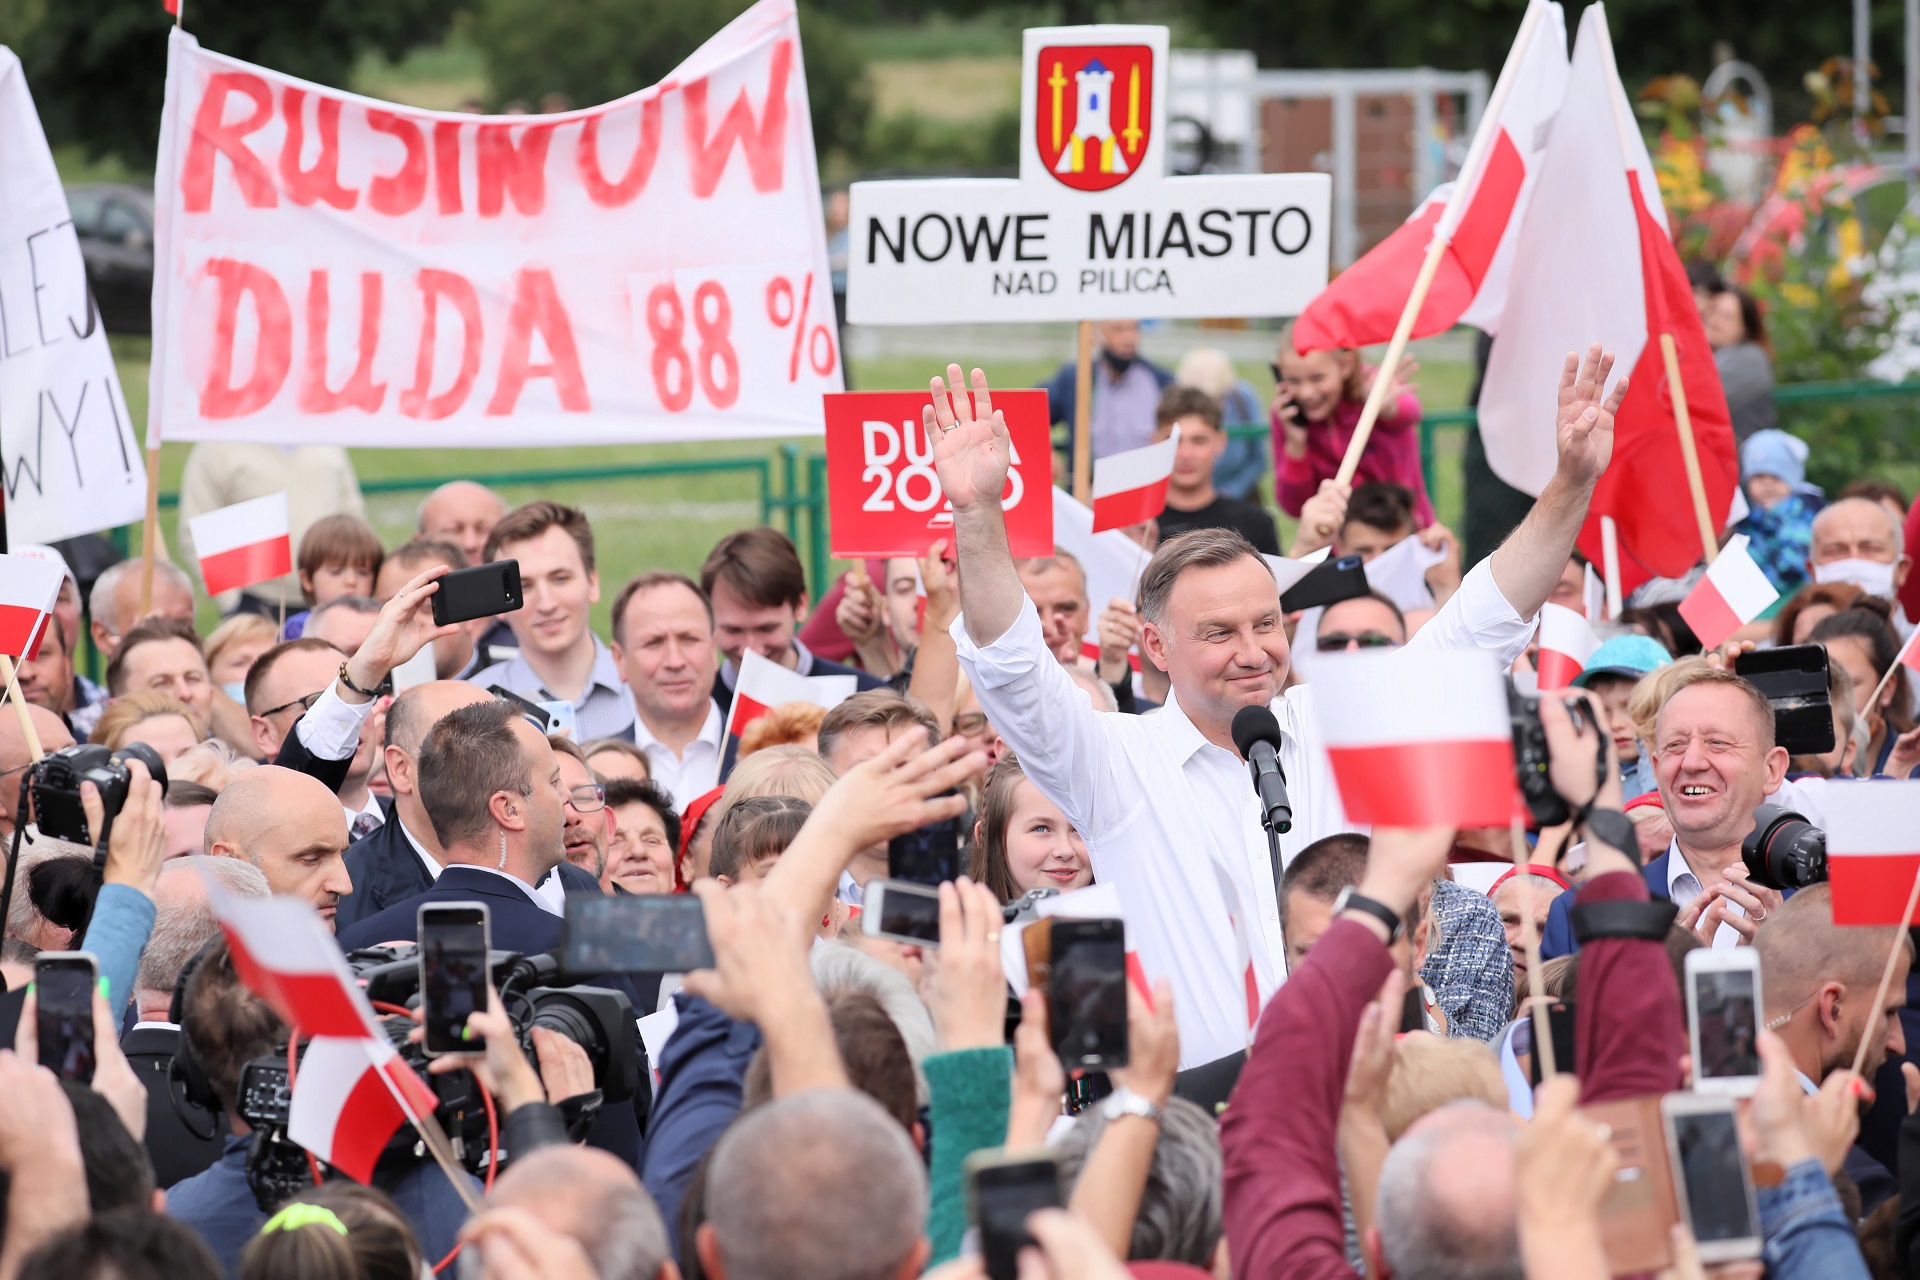 epa08543736 Polish President Andrzej Duda attends his meeting with local residents in Odrzywol village, east-central Poland, 13 July 2020.
Andrzej Duda has been re-elected as the country's president, the right-wing politician will lead Poland for a second term, as he won 51.21 percent of the vote, while opposition candidate Rafal Trzaskowski received 48.79 percent, Poland's National Electoral Commission announced on 13 July 2020.  EPA/Leszek Szymanski POLAND OUT